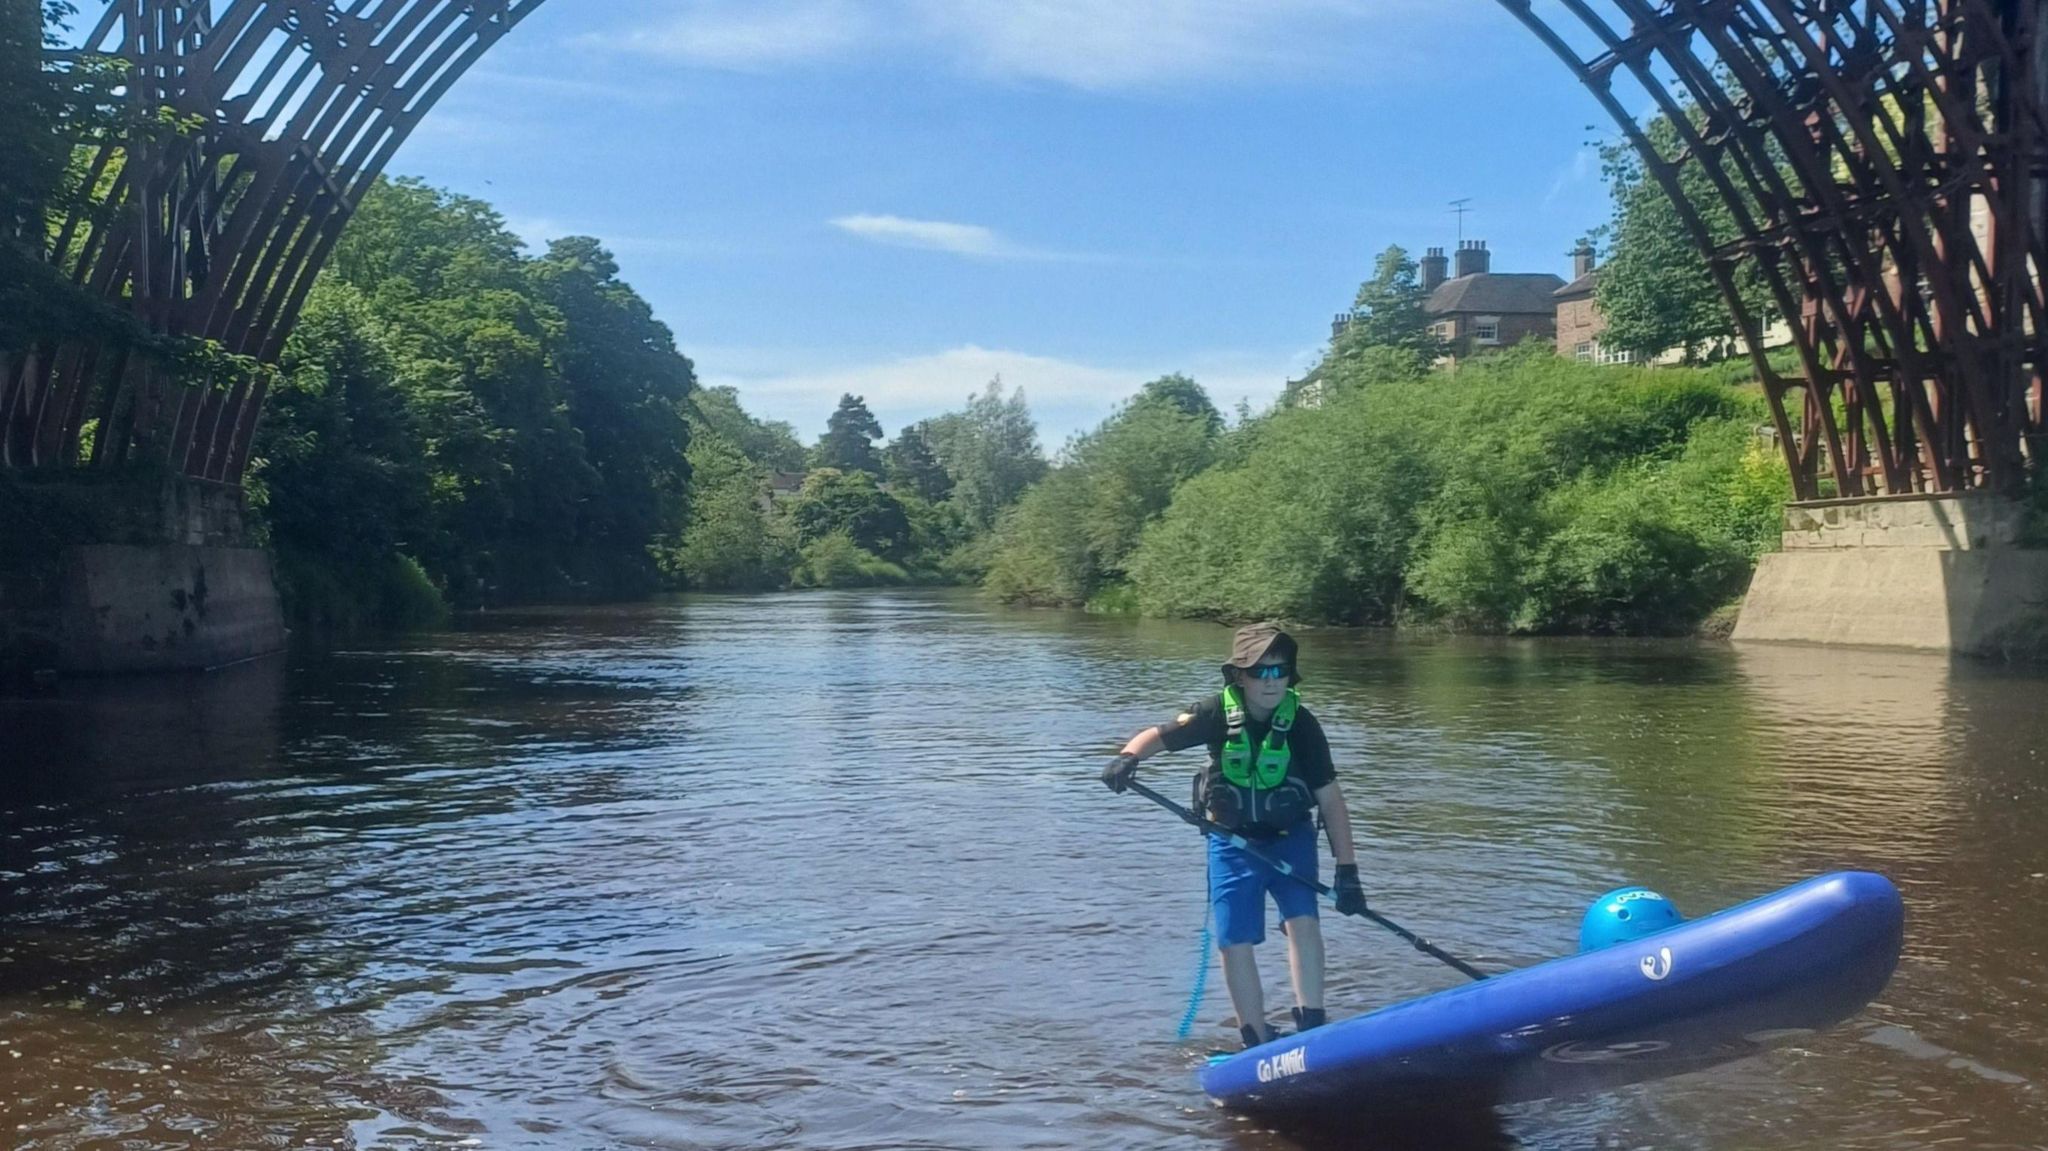 Len, 11, on a paddleboard in a river